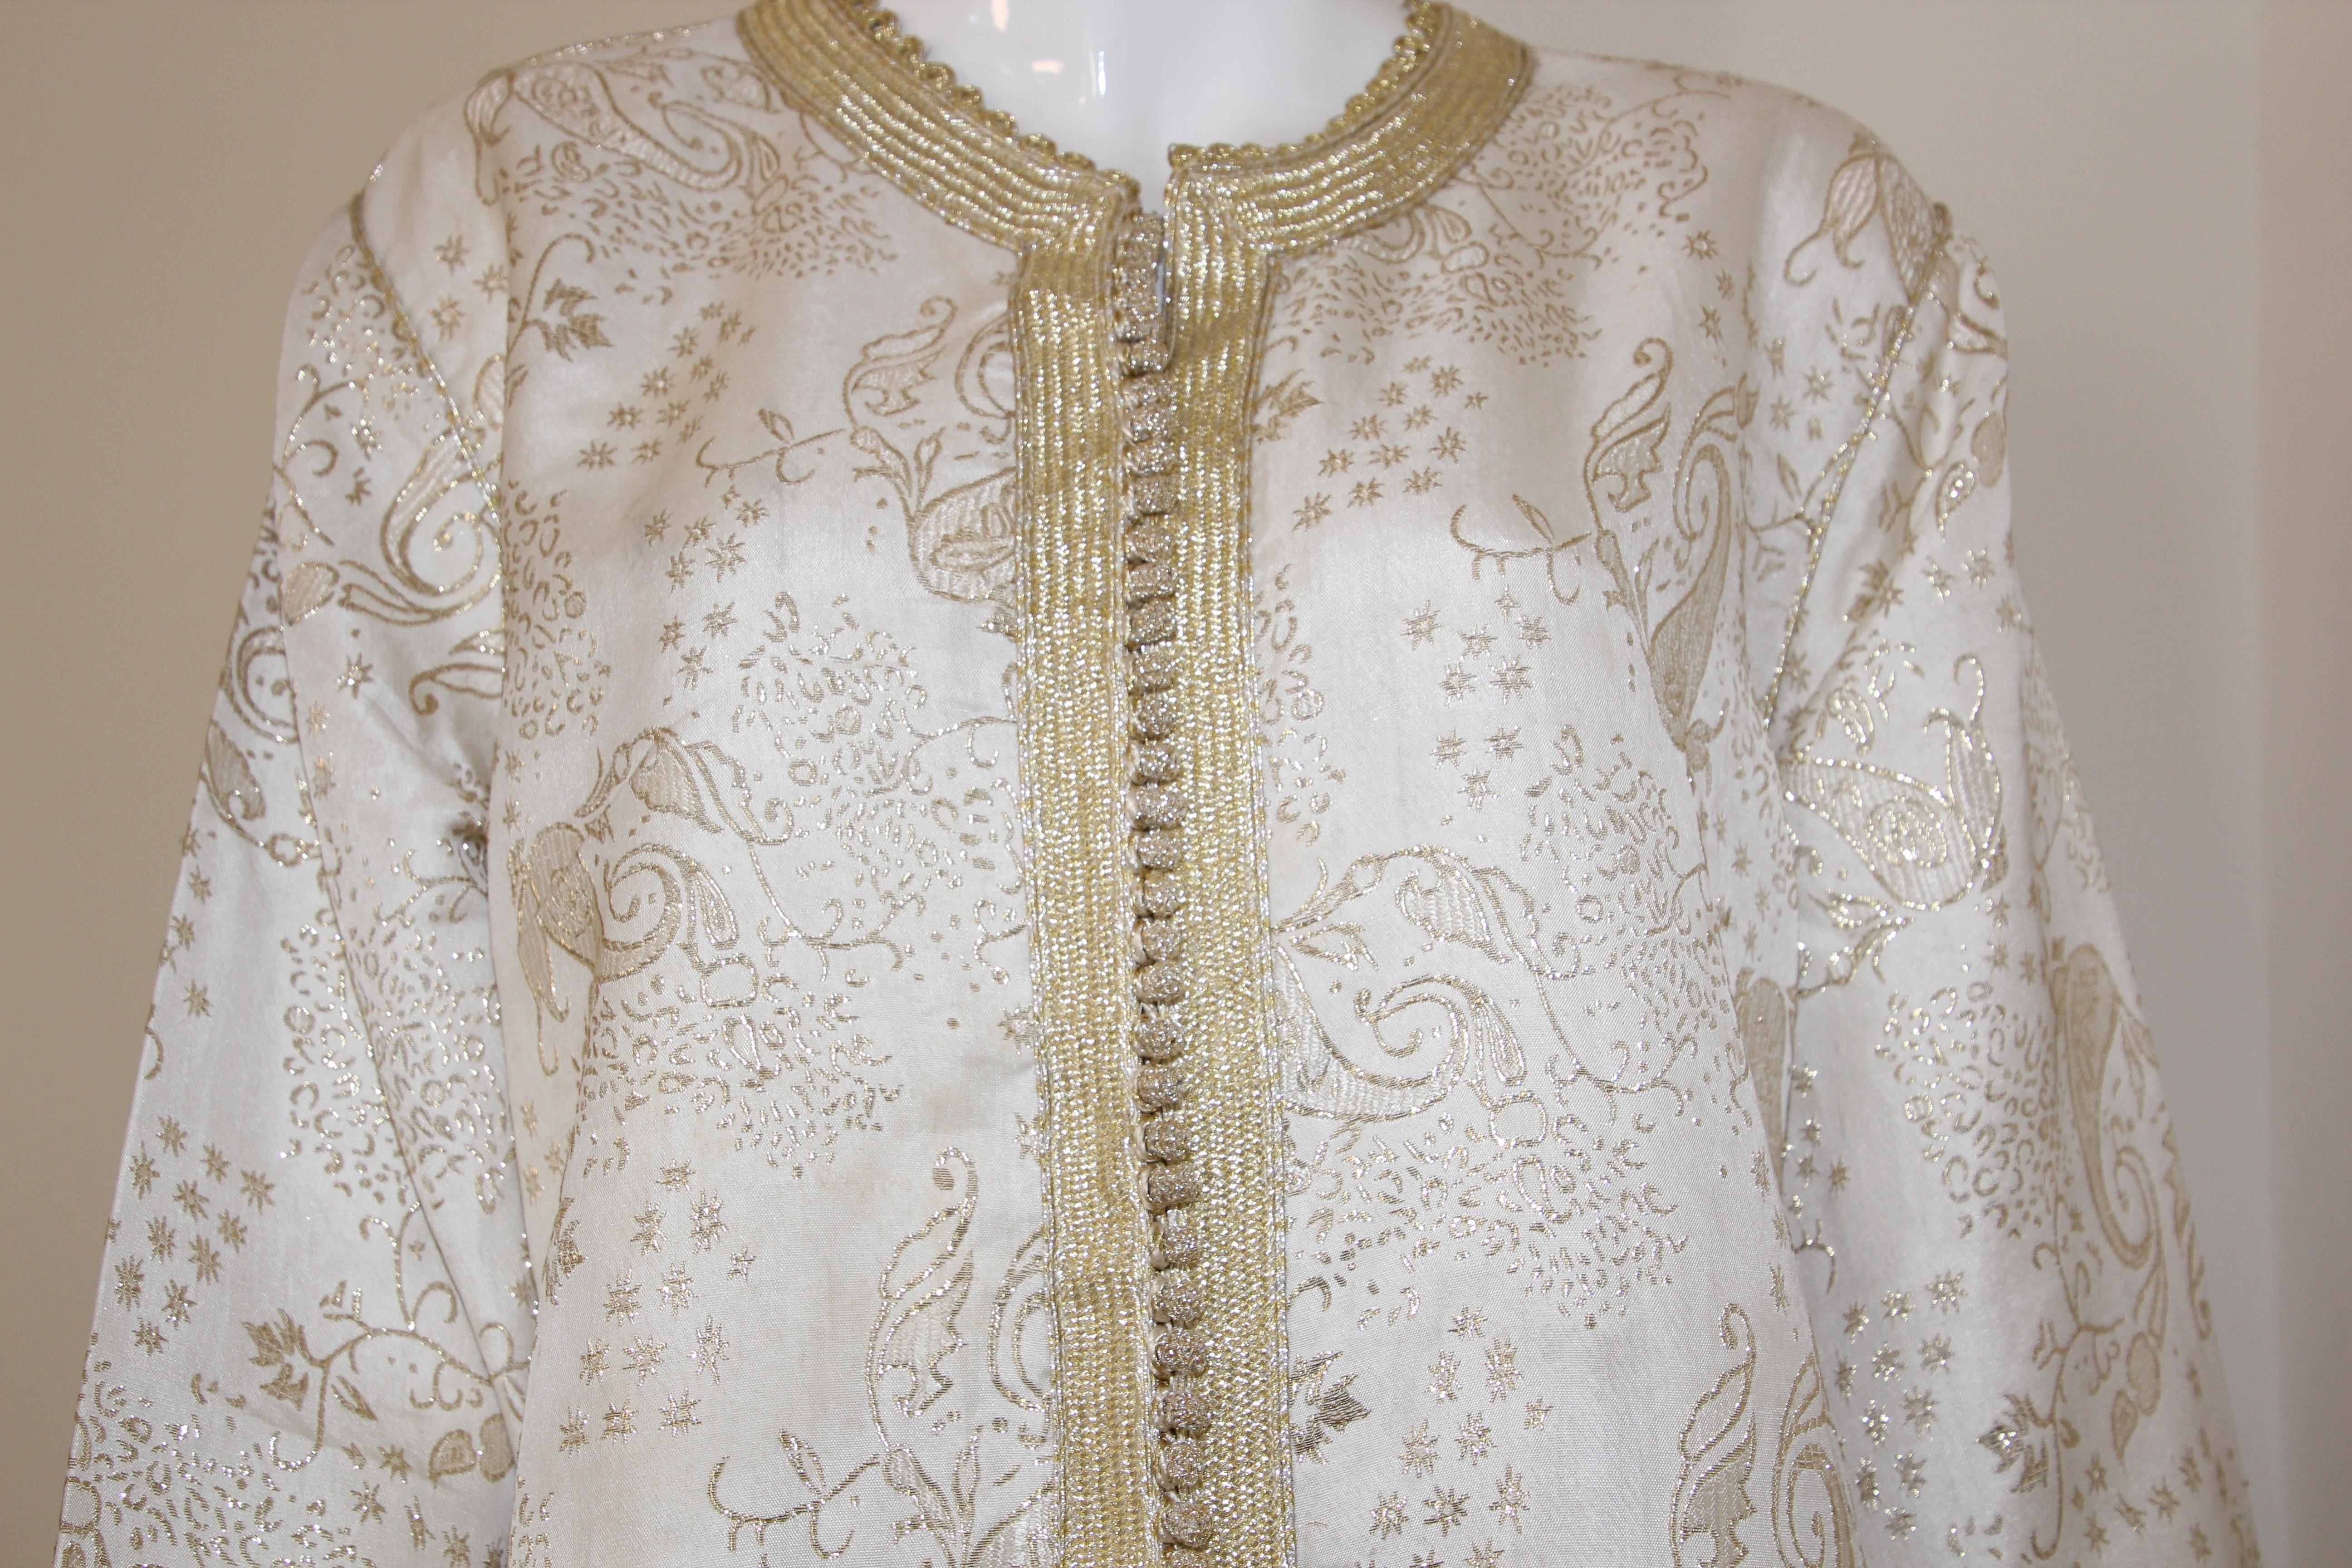 Elegant Moroccan White Caftan with Gold Metallic Floral Brocade For Sale 11